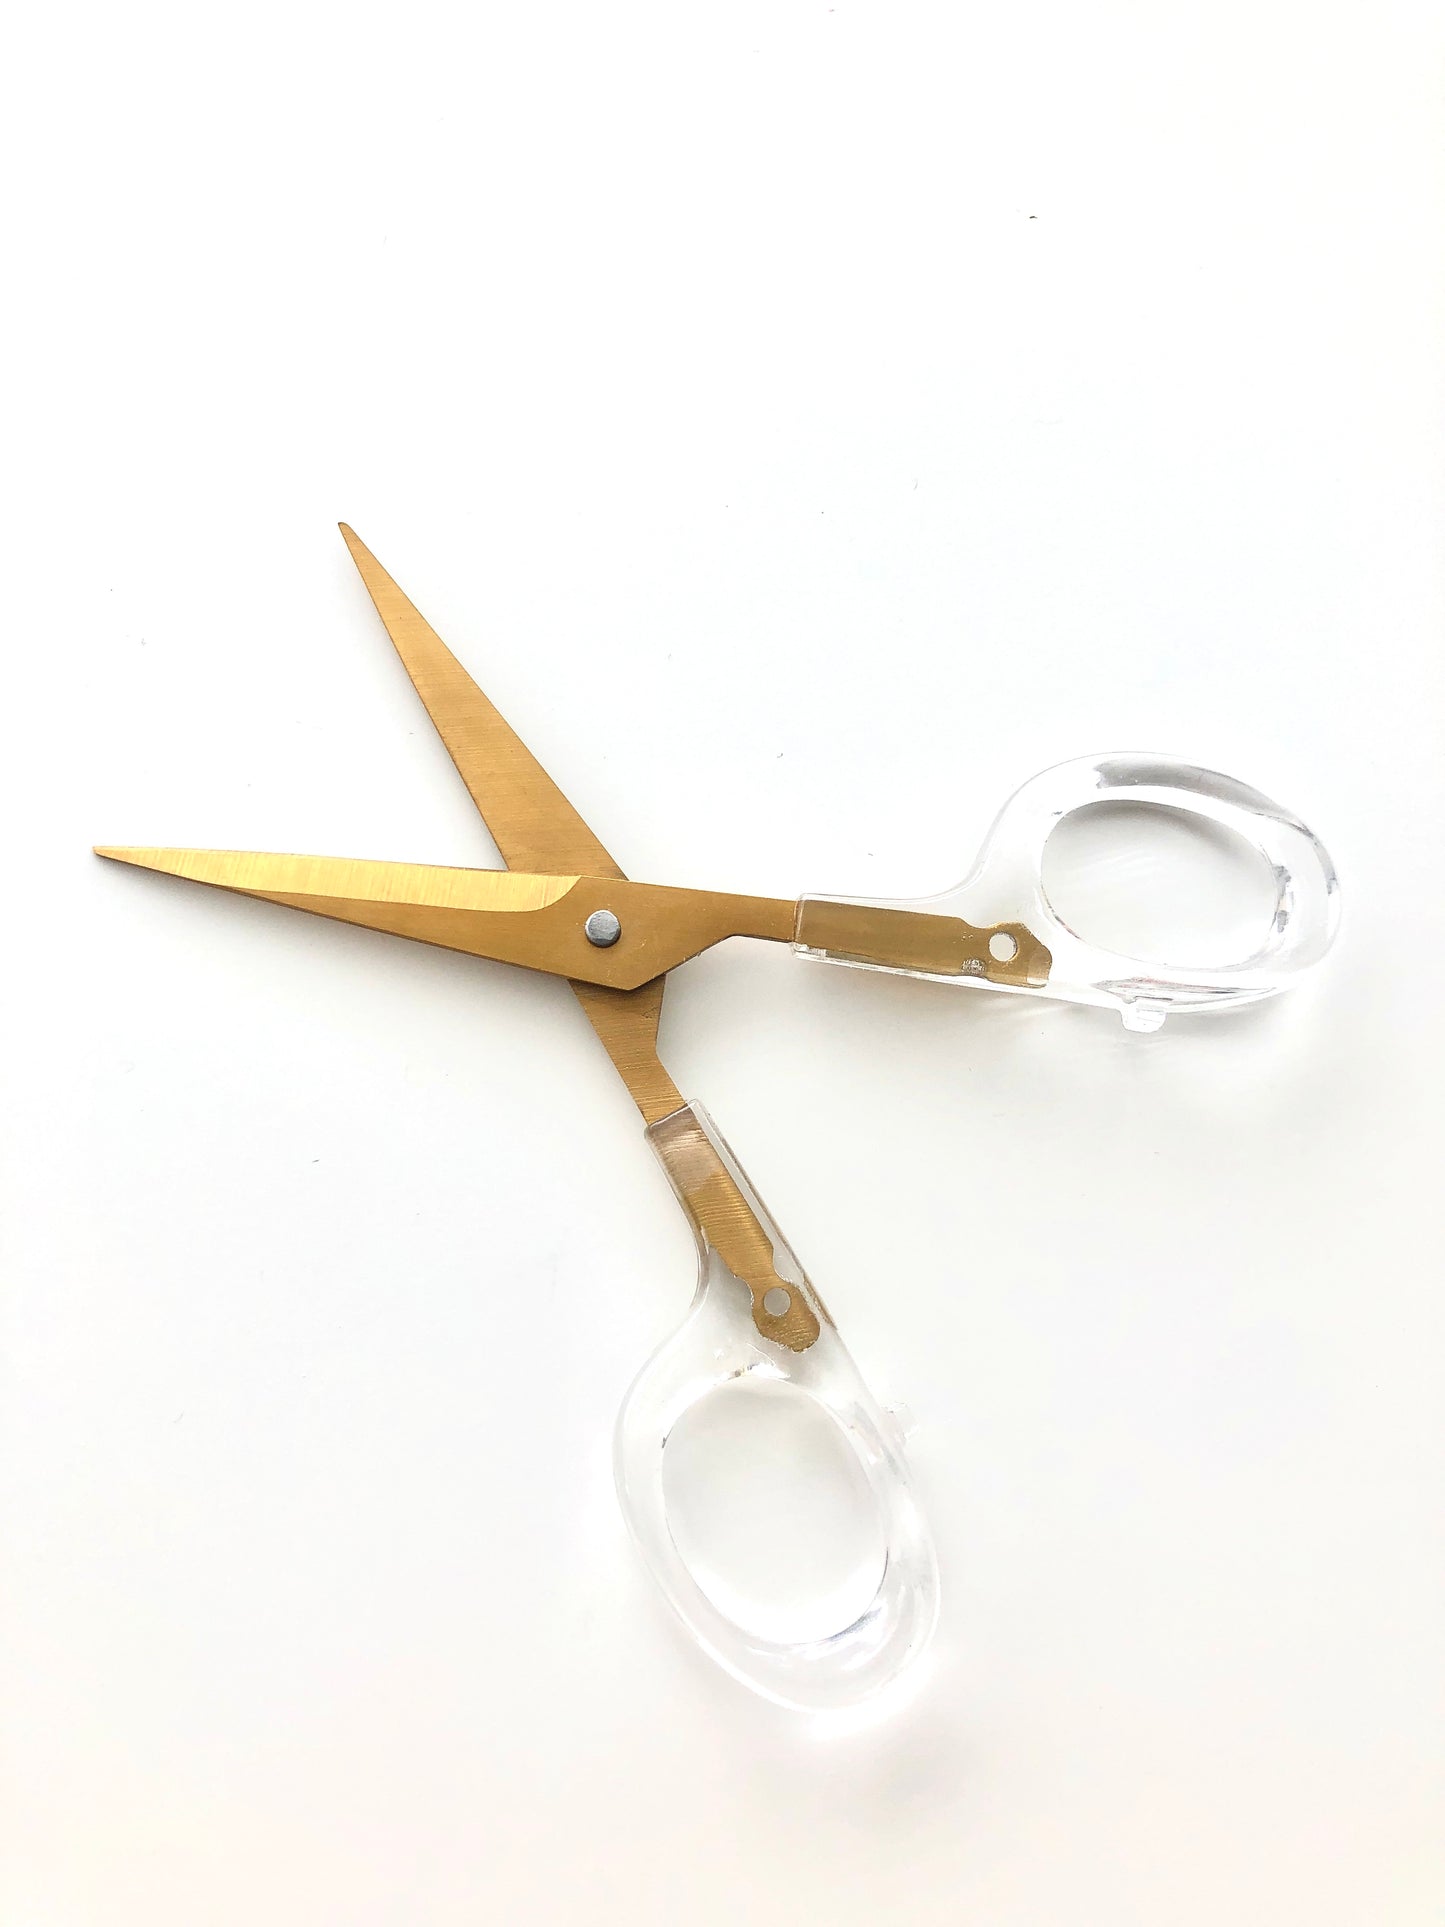 Brushed Gold Embroidery Scissors